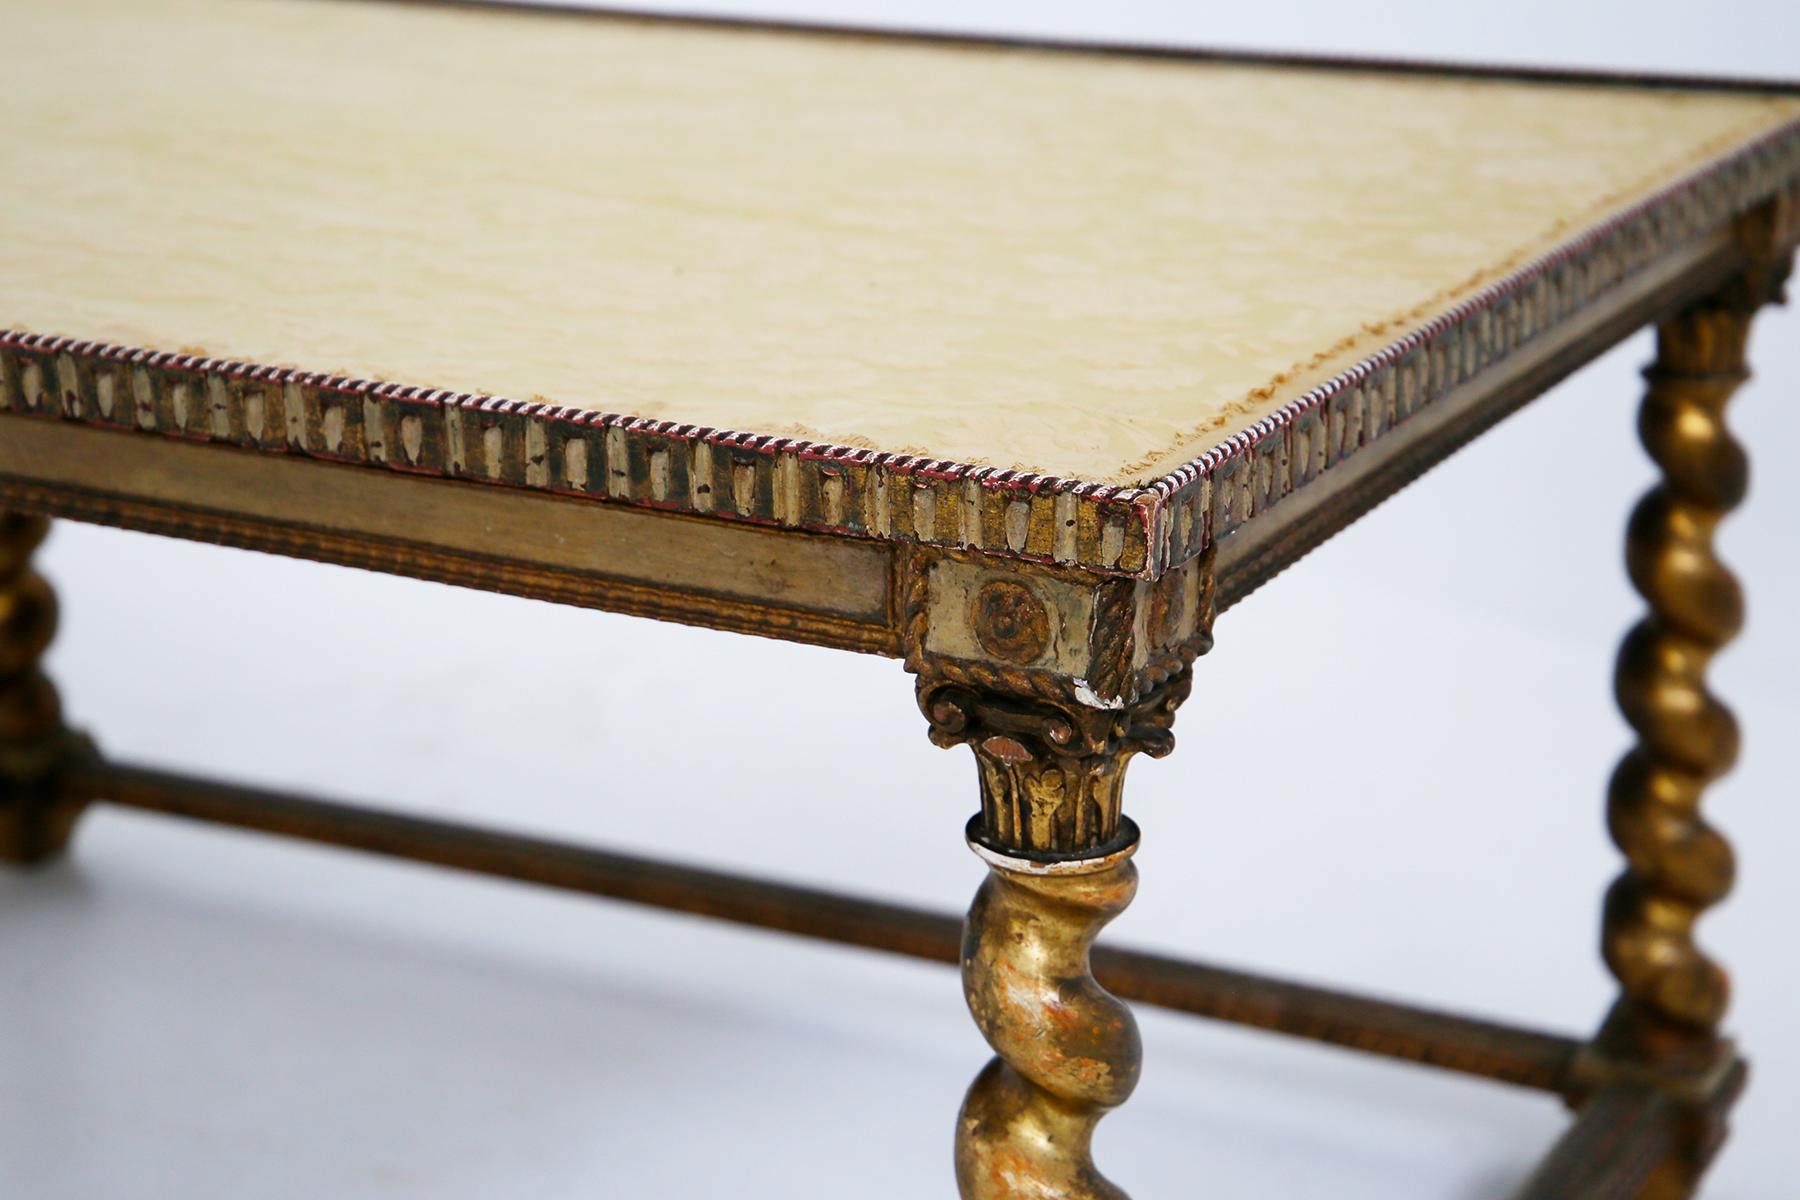 Large neoclassical Italian coffee table from the end of the 19th-beginning of the 20th century. The coffee table is made of gilded wood. The four legs are torchon shaped with carved wooden tips. Skillful workmanship also for the circumference of the